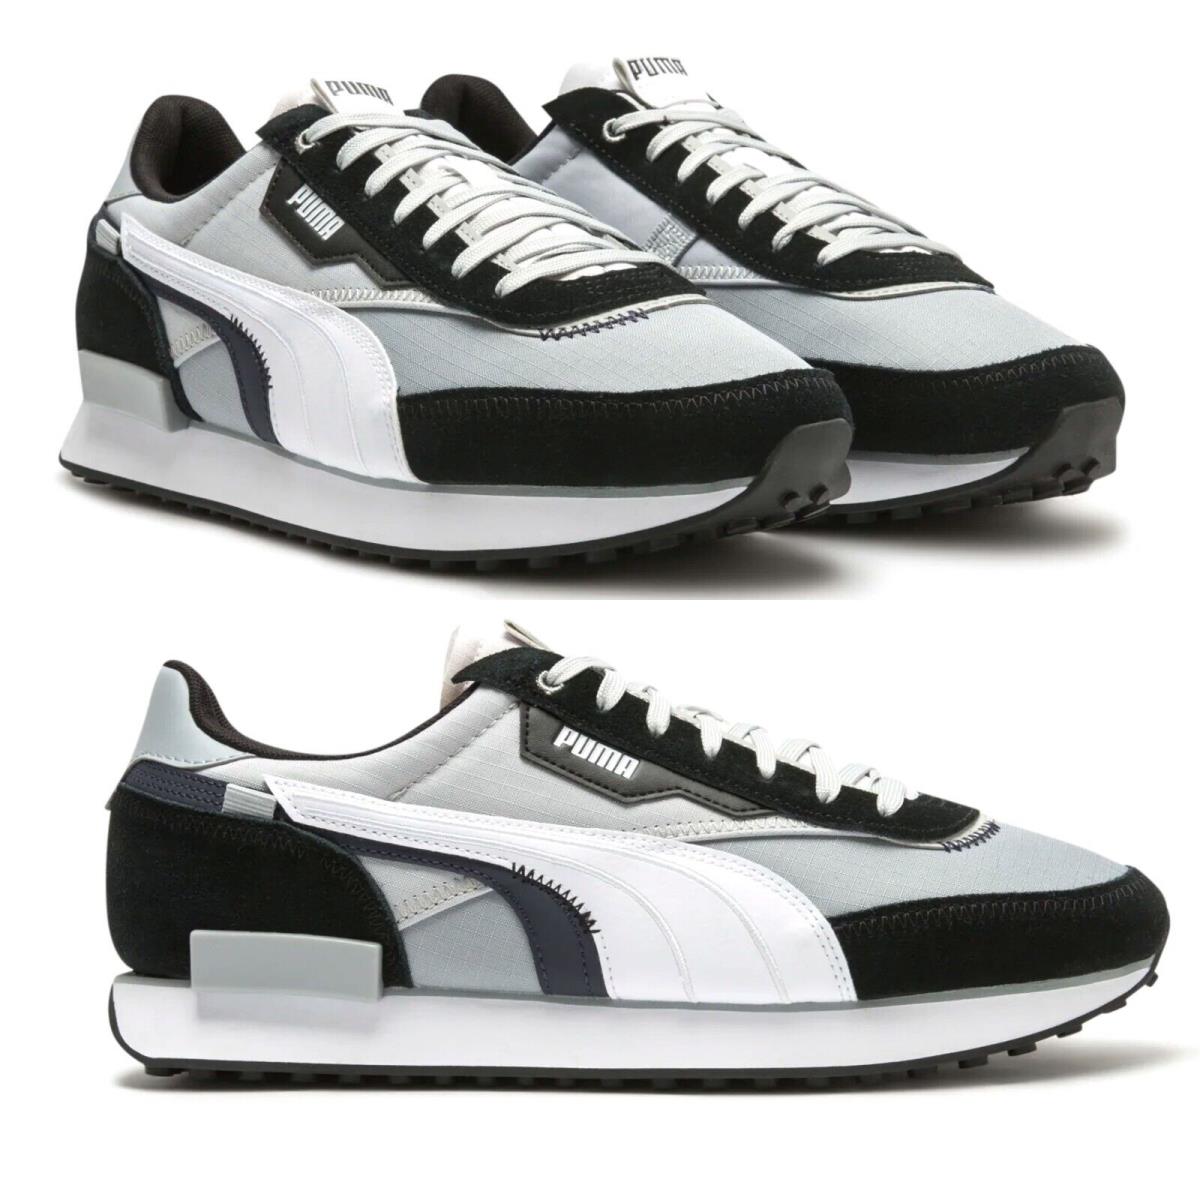 Puma Future Rider Shoes Athletic Sneakers Mens Casual Gray Black All Sizes